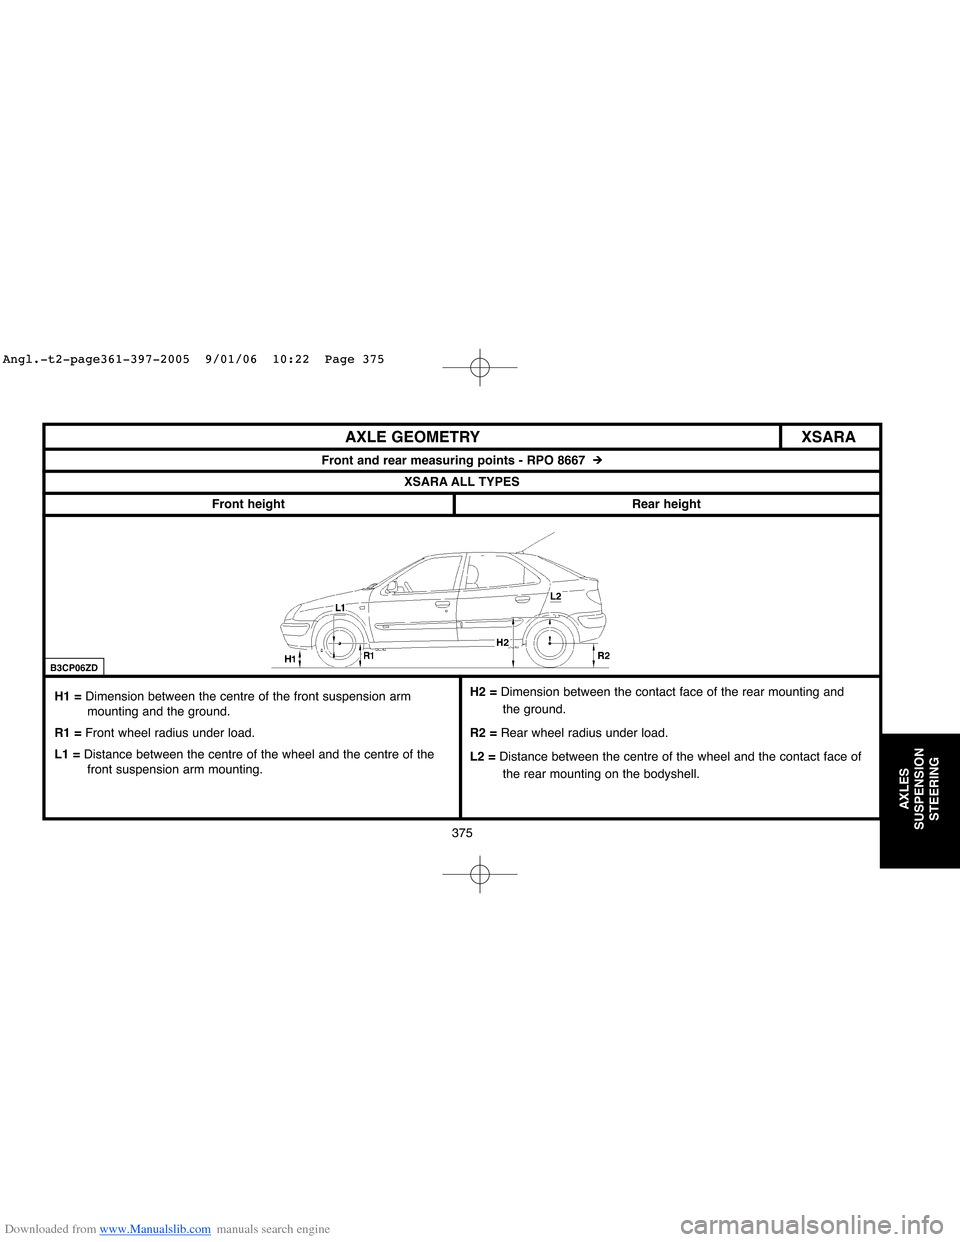 Citroen XSARA 2005 1.G Workshop Manual Downloaded from www.Manualslib.com manuals search engine 375
AXLES
SUSPENSION
STEERING
XSARA AXLE GEOMETRY
Front and rear measuring points - RPO 8667  #
XSARA ALL TYPES
Front height
Rear height
H1 = D